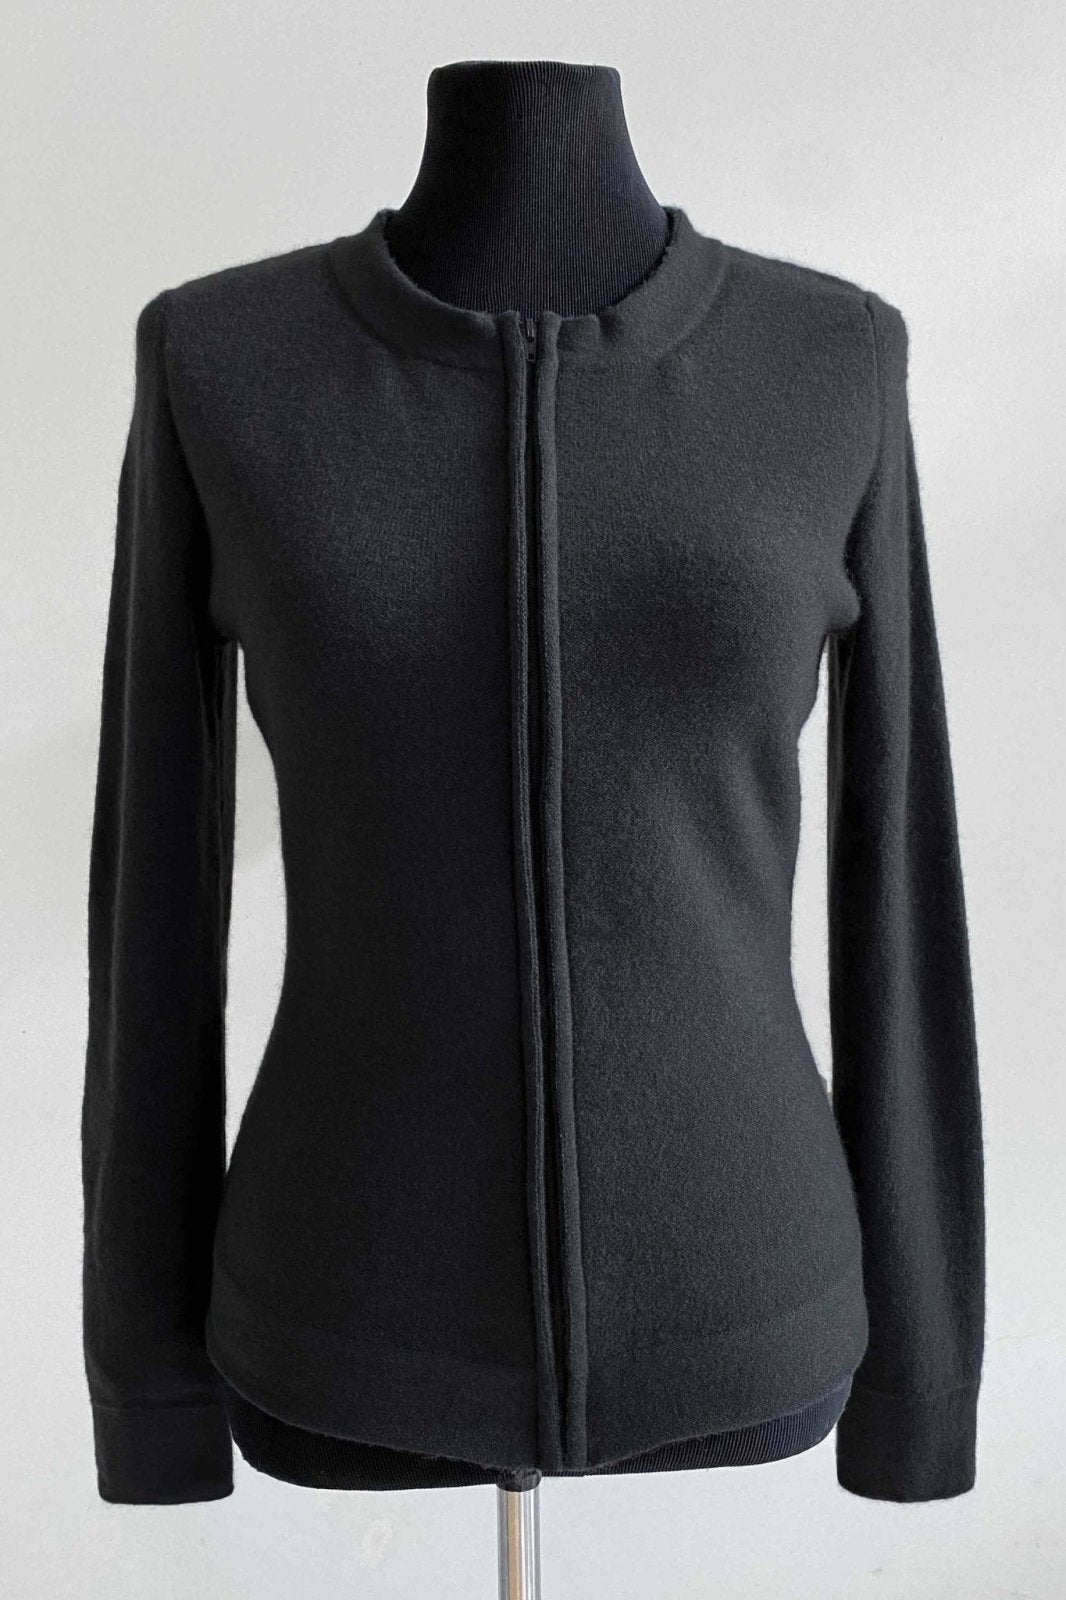 Fitted zip up cardigan in khaki, slate grey and black - SEMON Cashmere